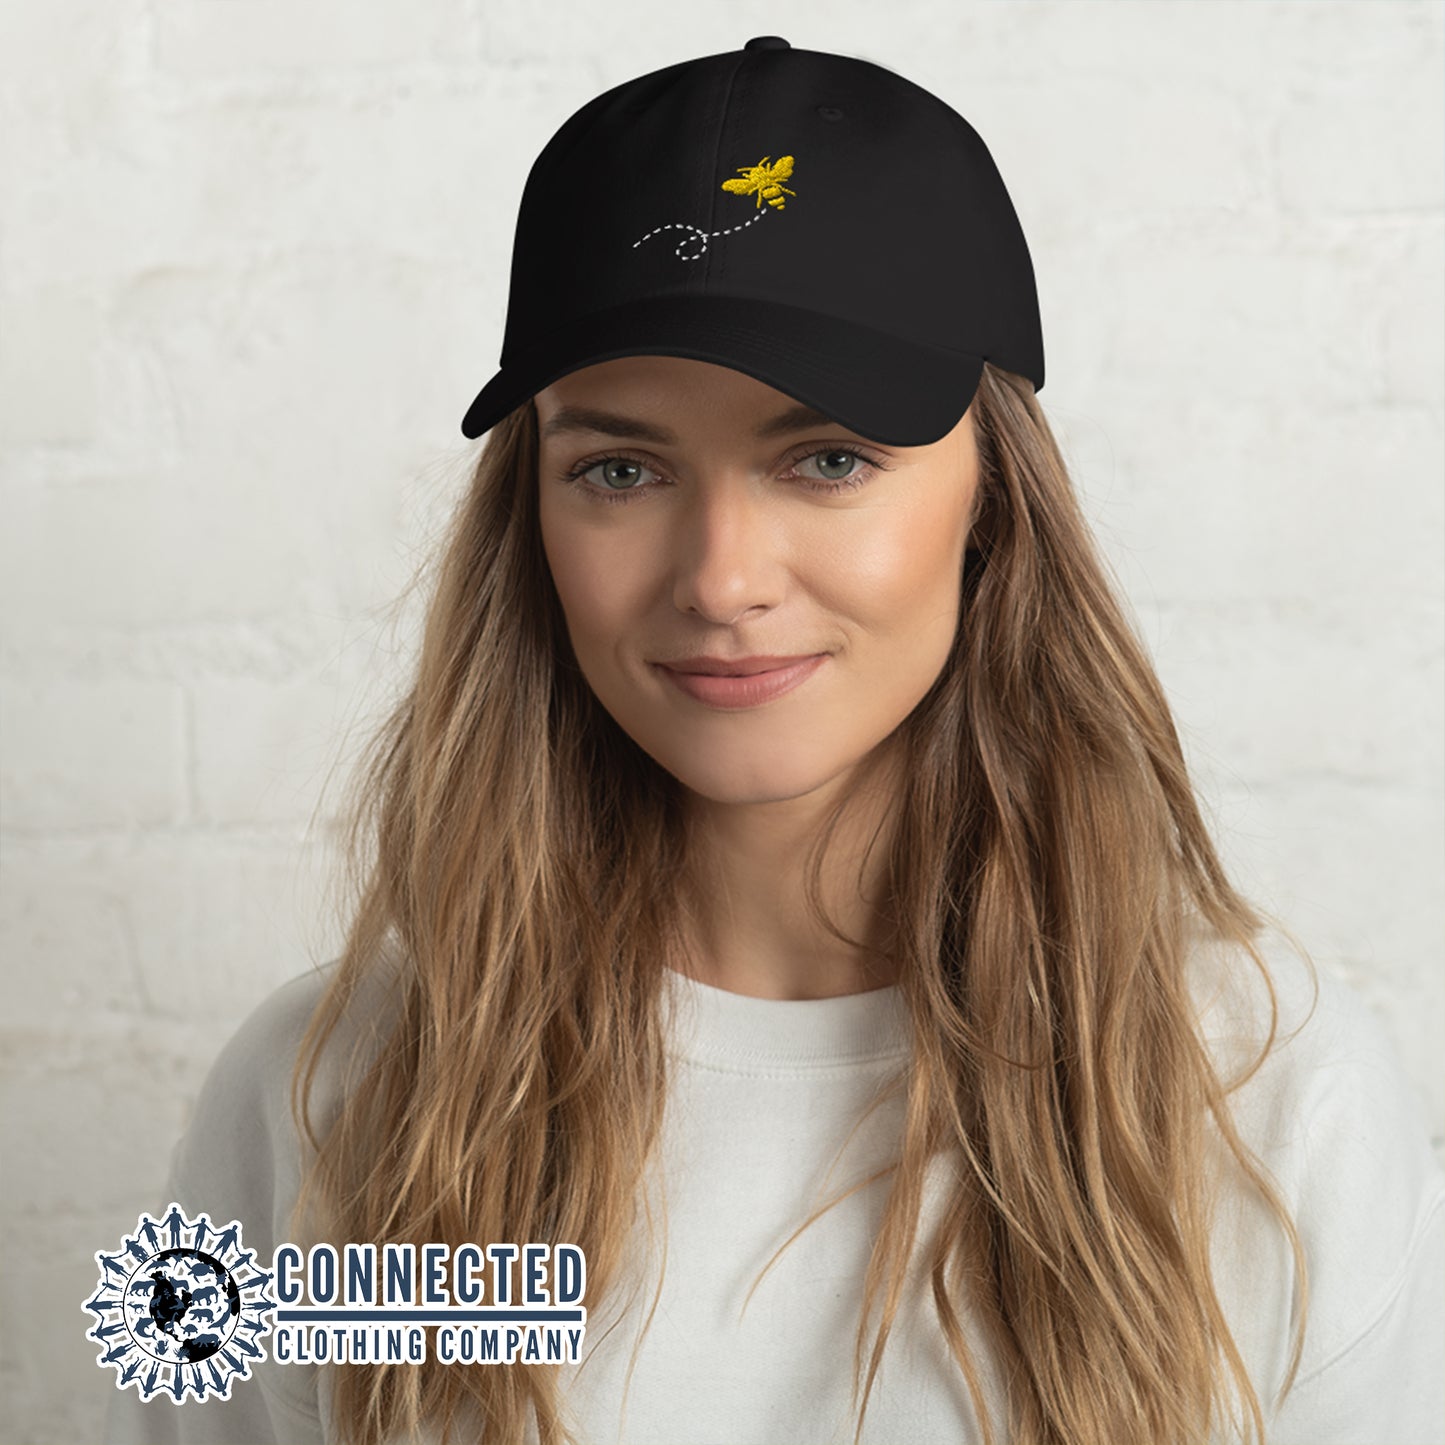  Model Wearing Bee Embroidered Cotton Cap - sweetsherriloudesigns - Ethical and Sustainably Made Apparel - 10% of proceeds donated to the Honeybee Conservancy